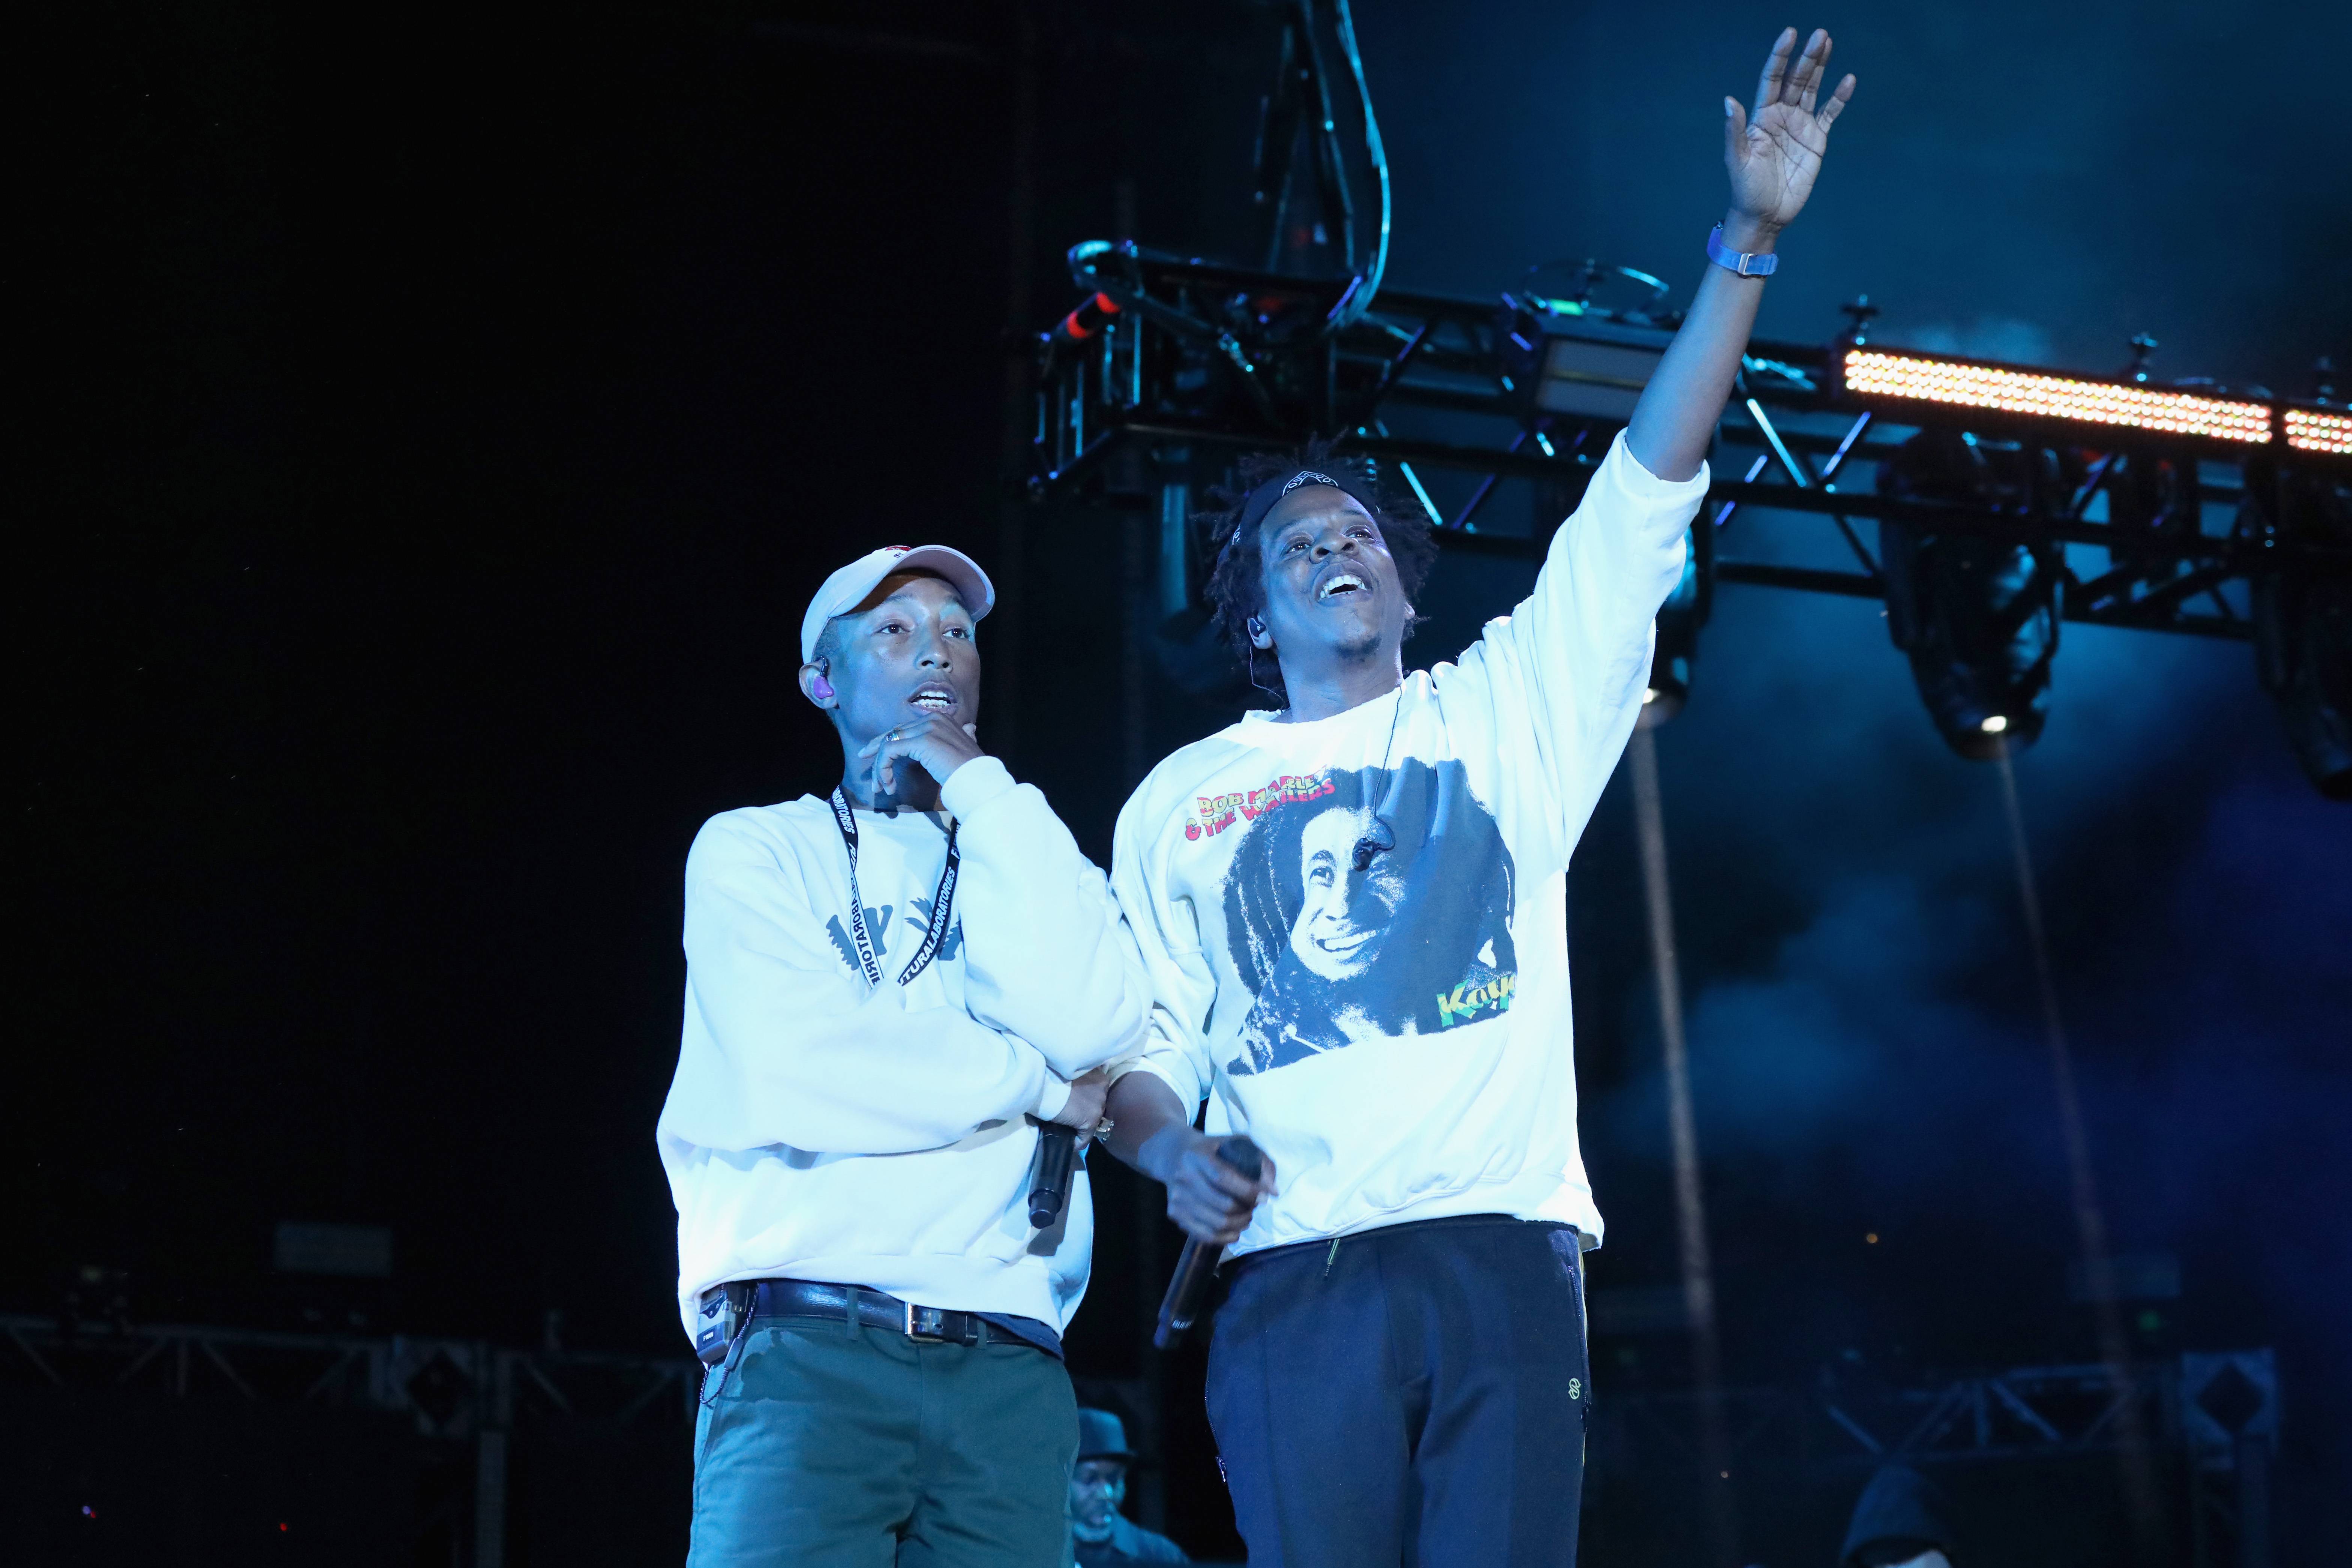 Our favorite photos from Pharrell's Something in the Water music